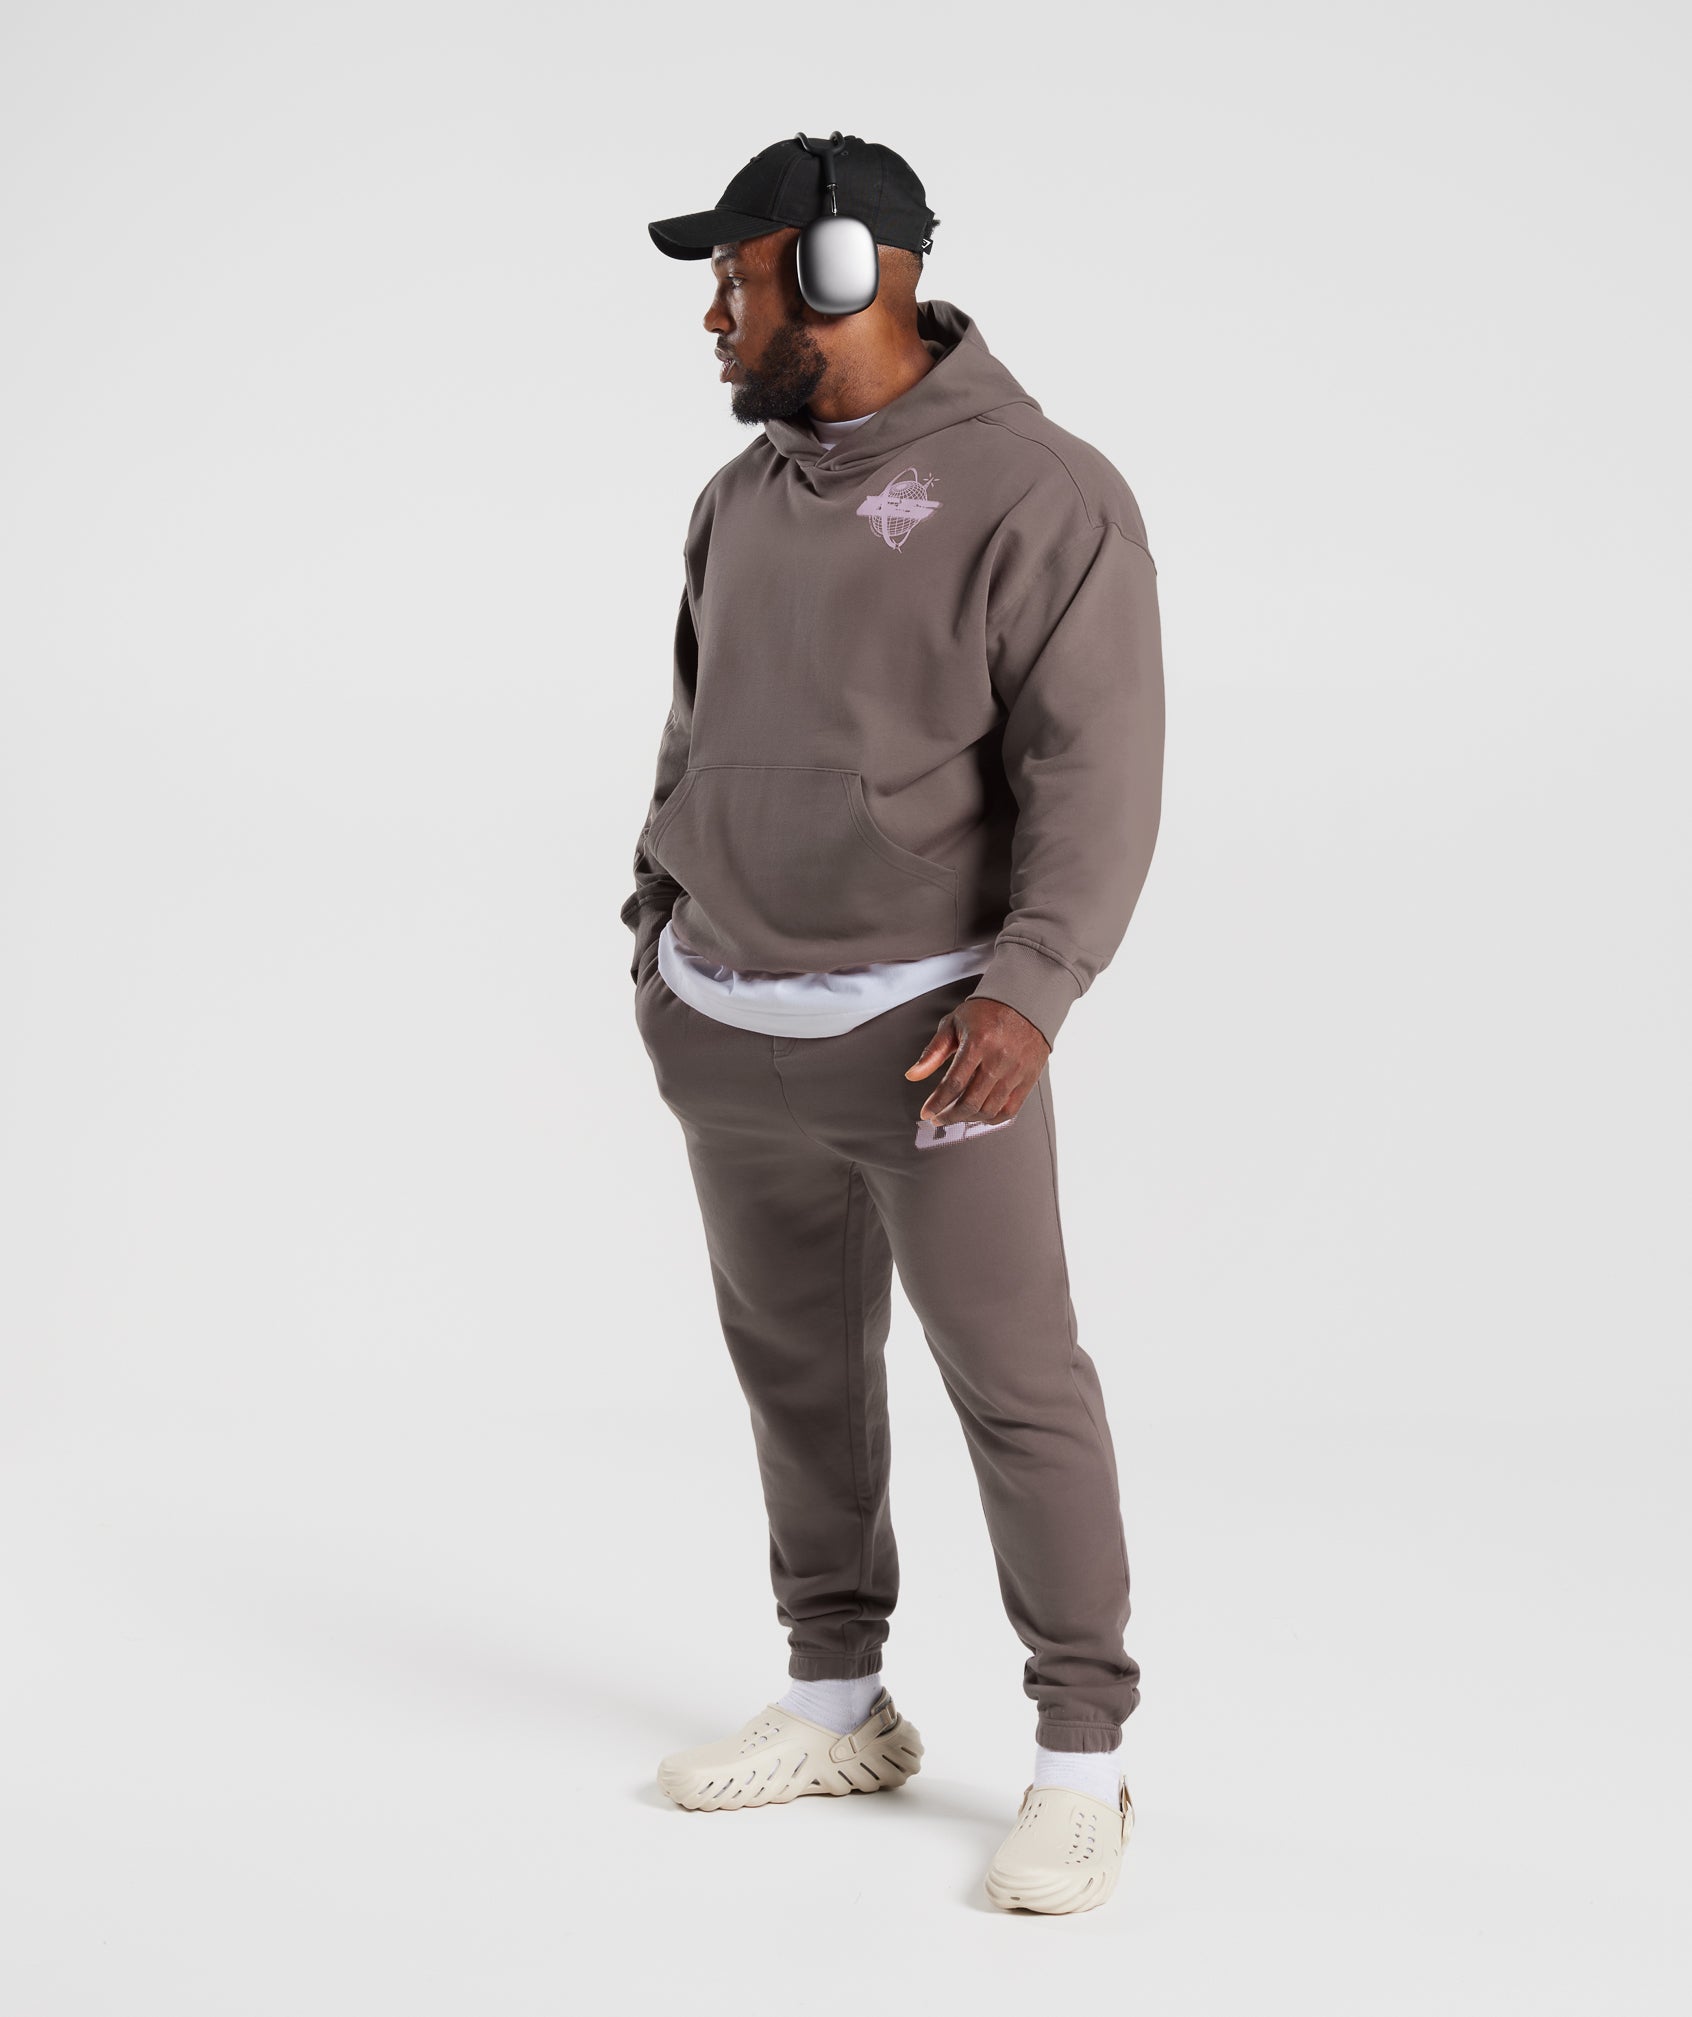 Intergalactic Lifting Hoodie in Walnut Mauve - view 4